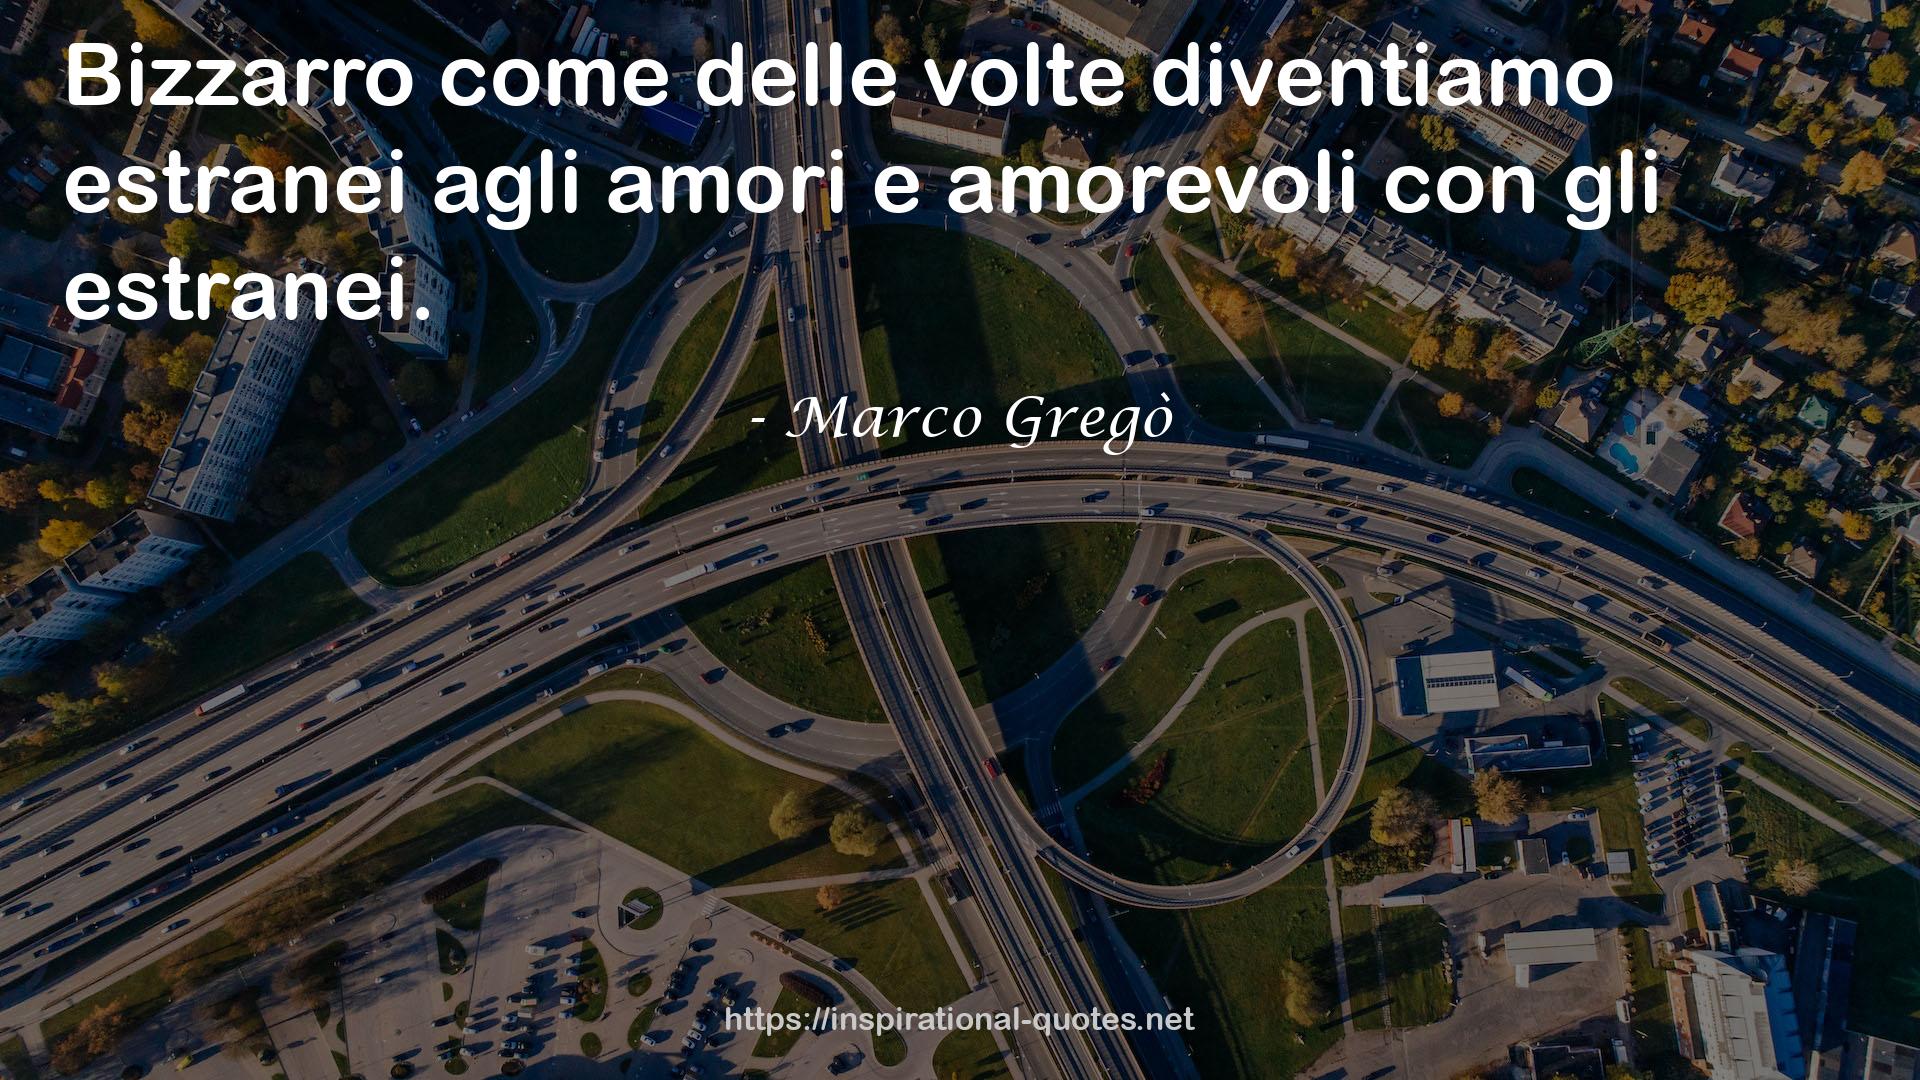 Marco Gregò QUOTES